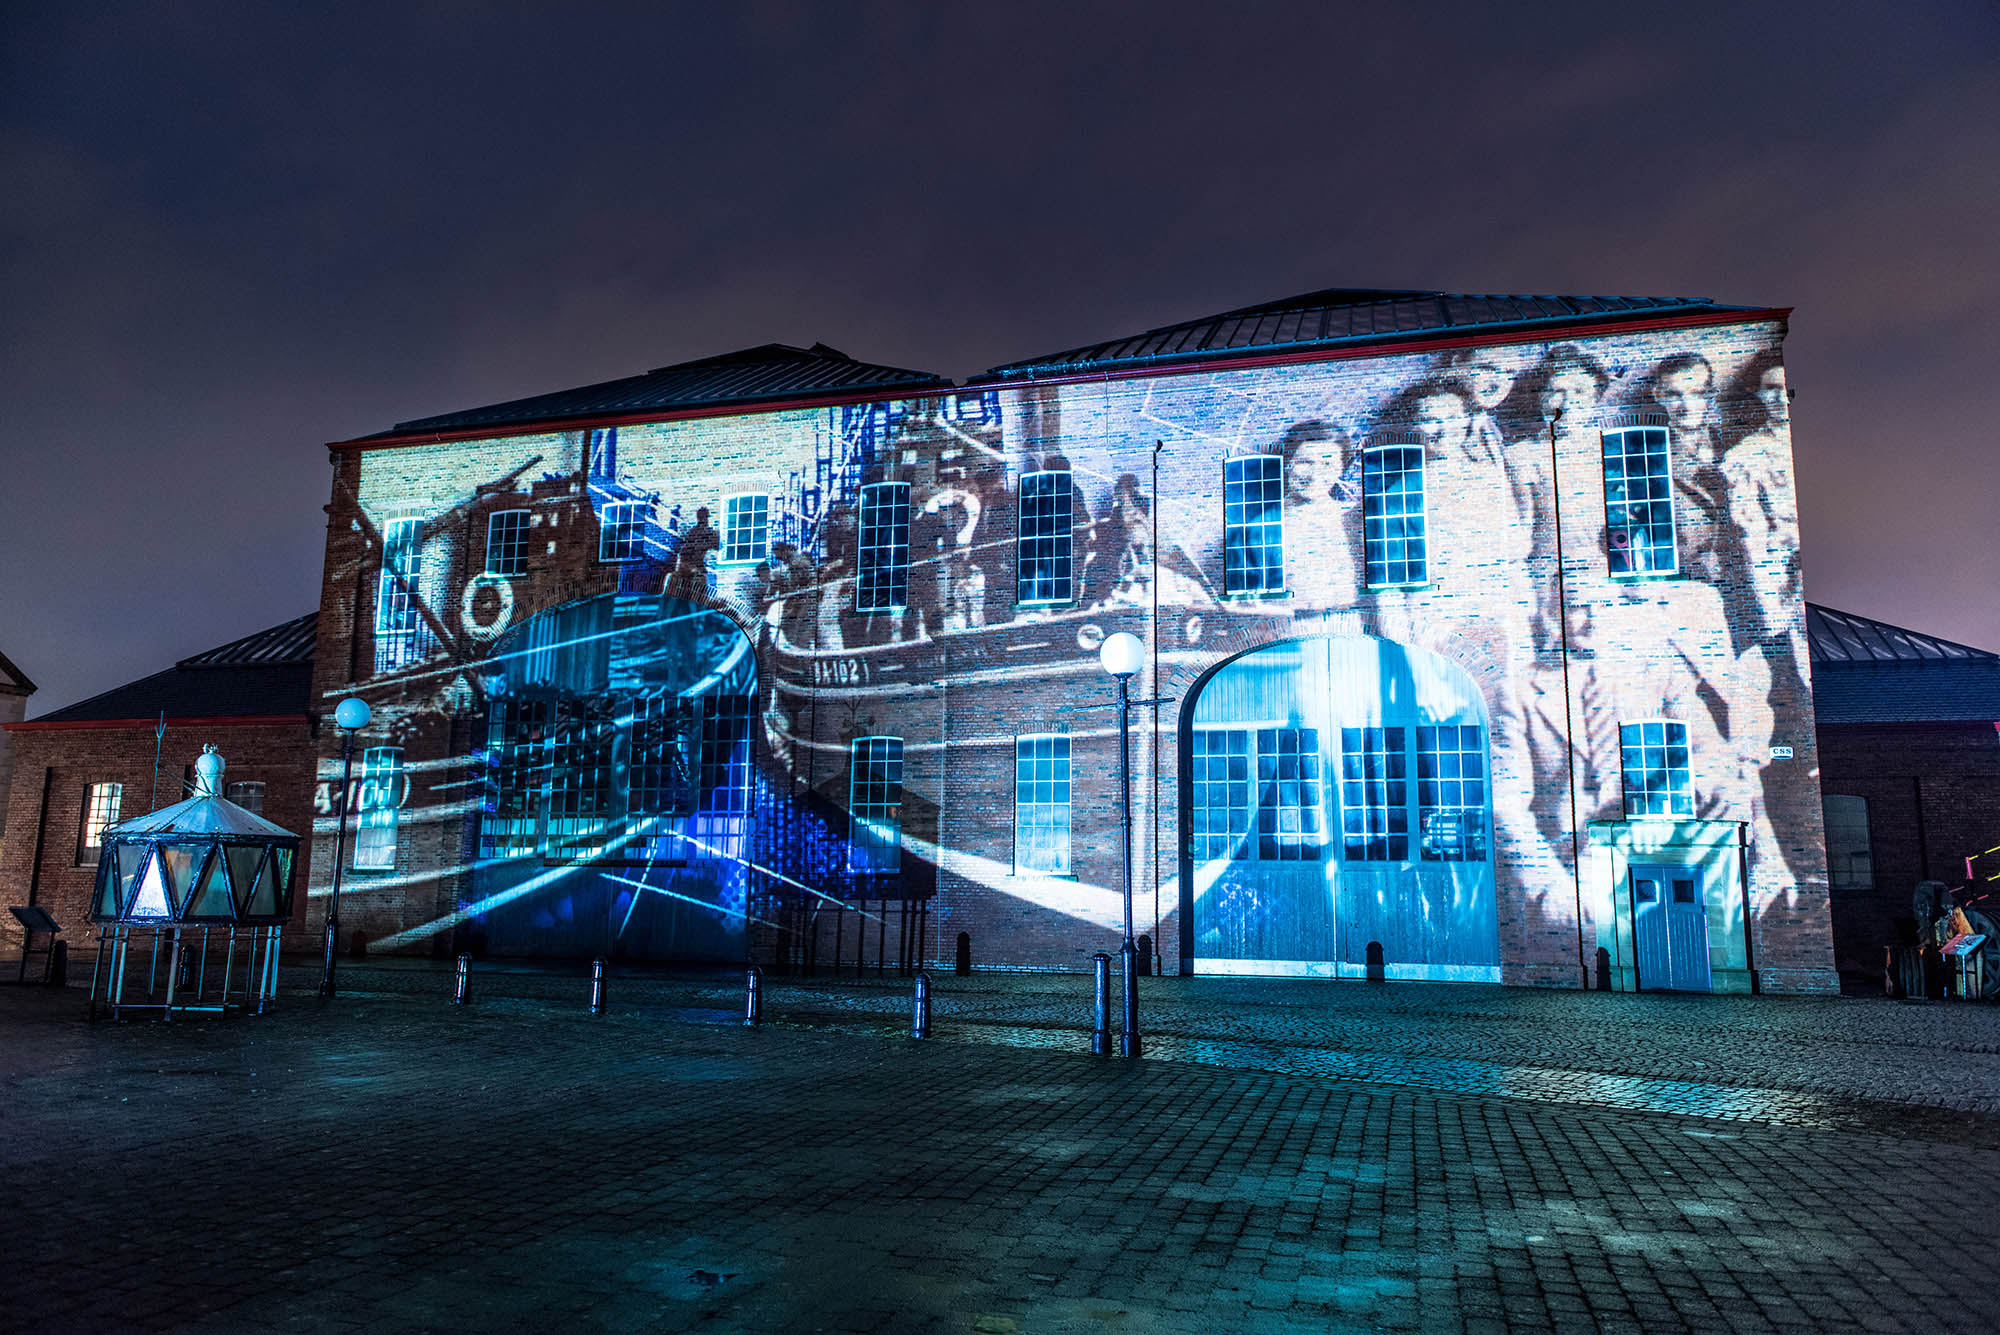 https://doubletakeprojections.com/wp-content/uploads/2020/03/Irvine_projection_mapping_spectacle_scotland_uk_iluminate_light_show_animation_live_launch_event_show_3.jpg